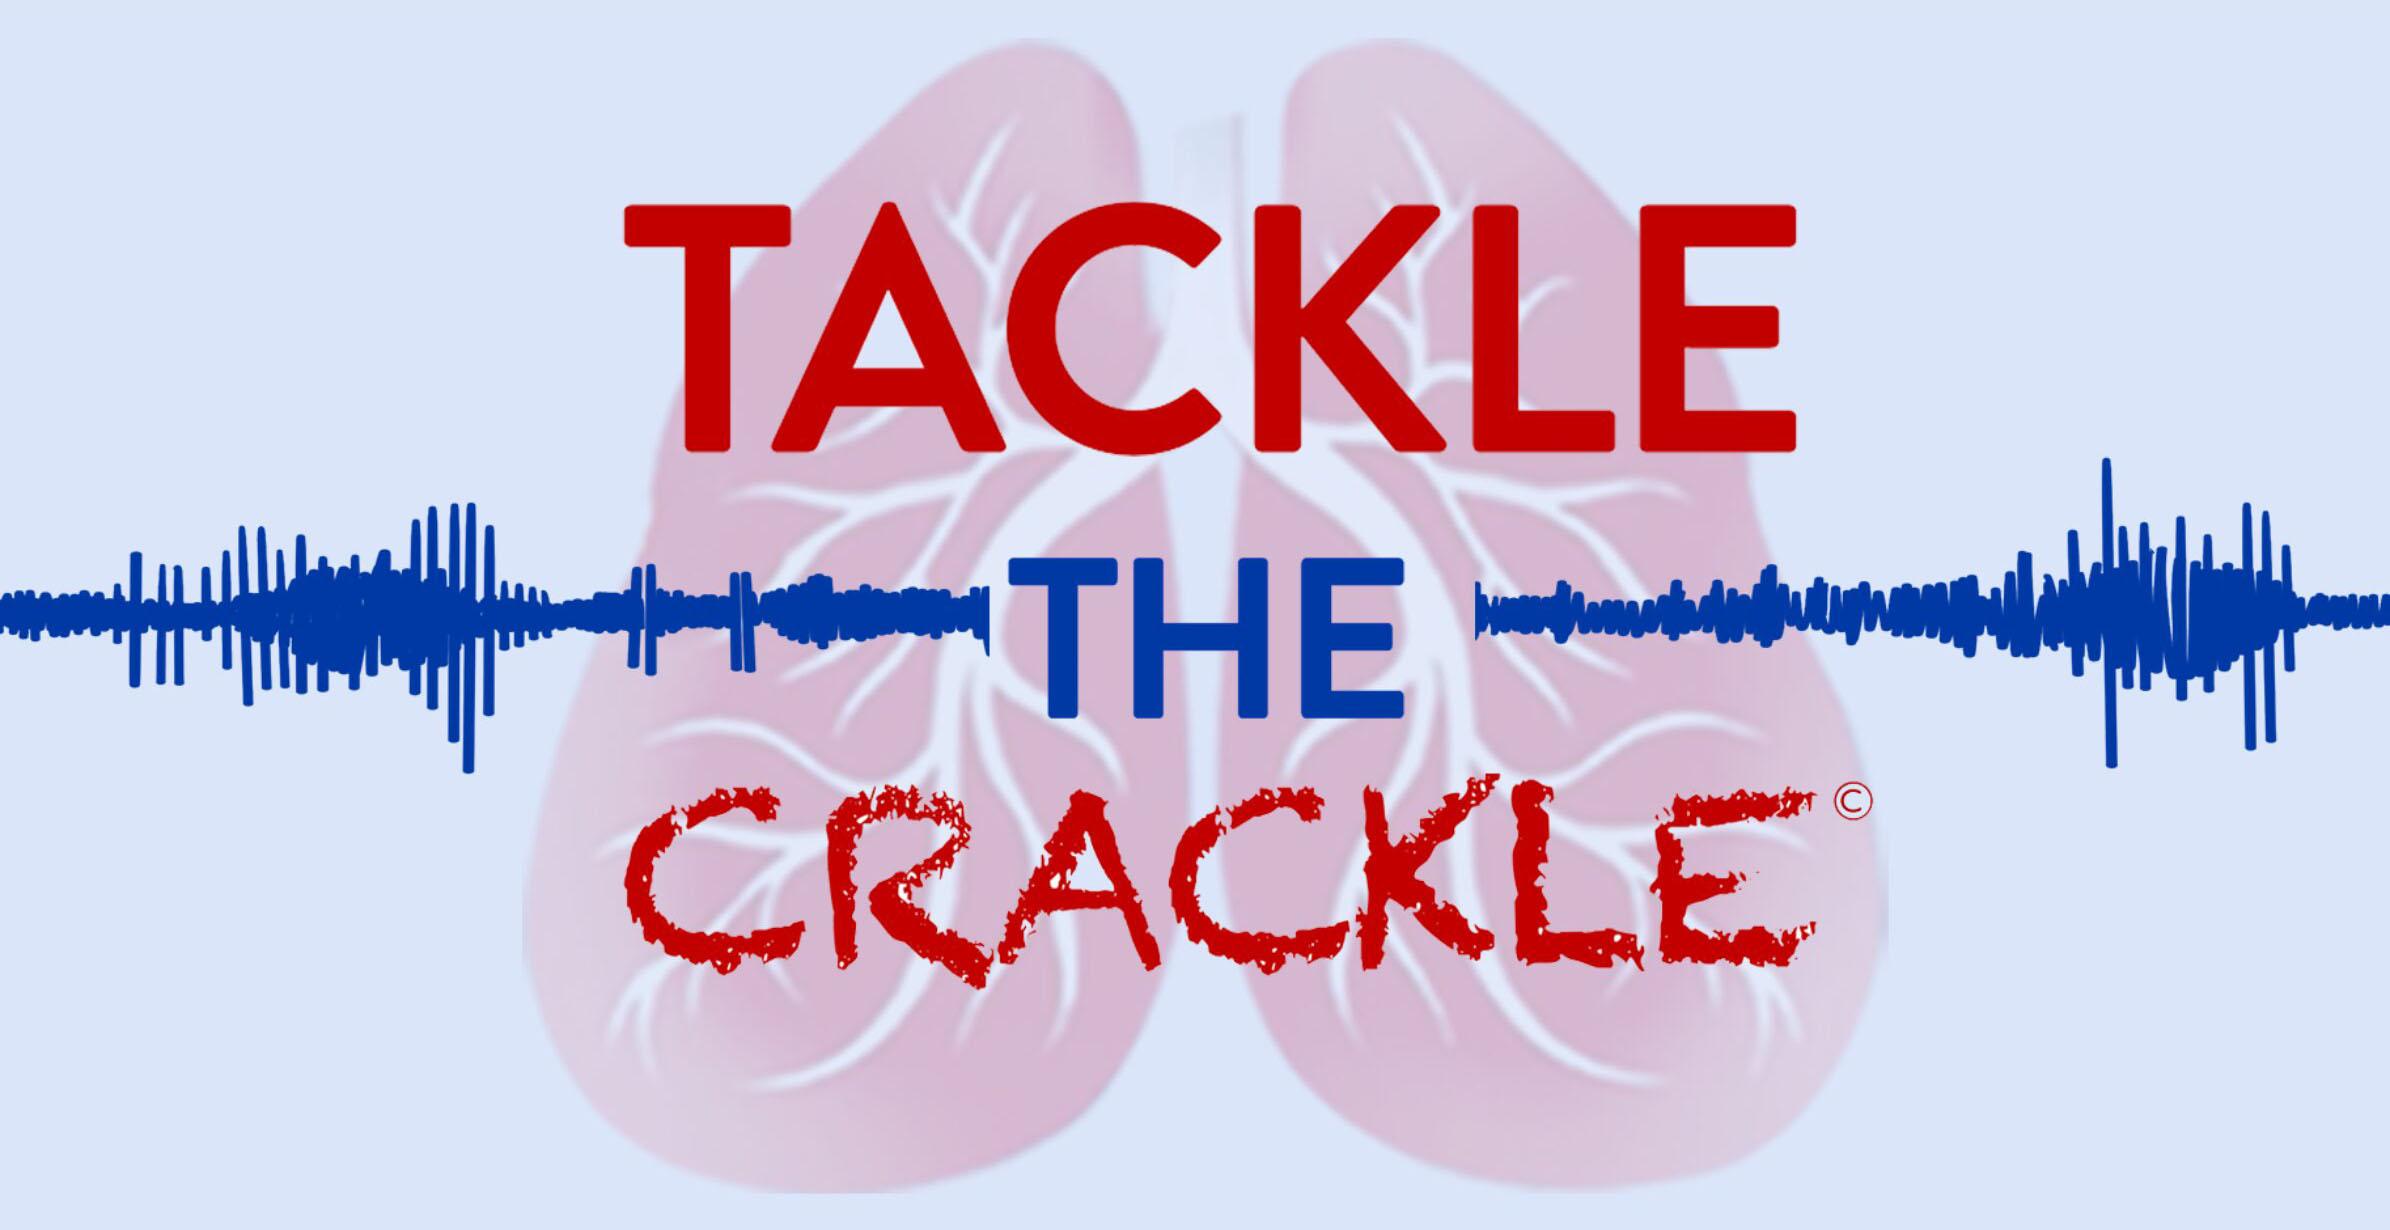 Tackle the crackle caused by pf